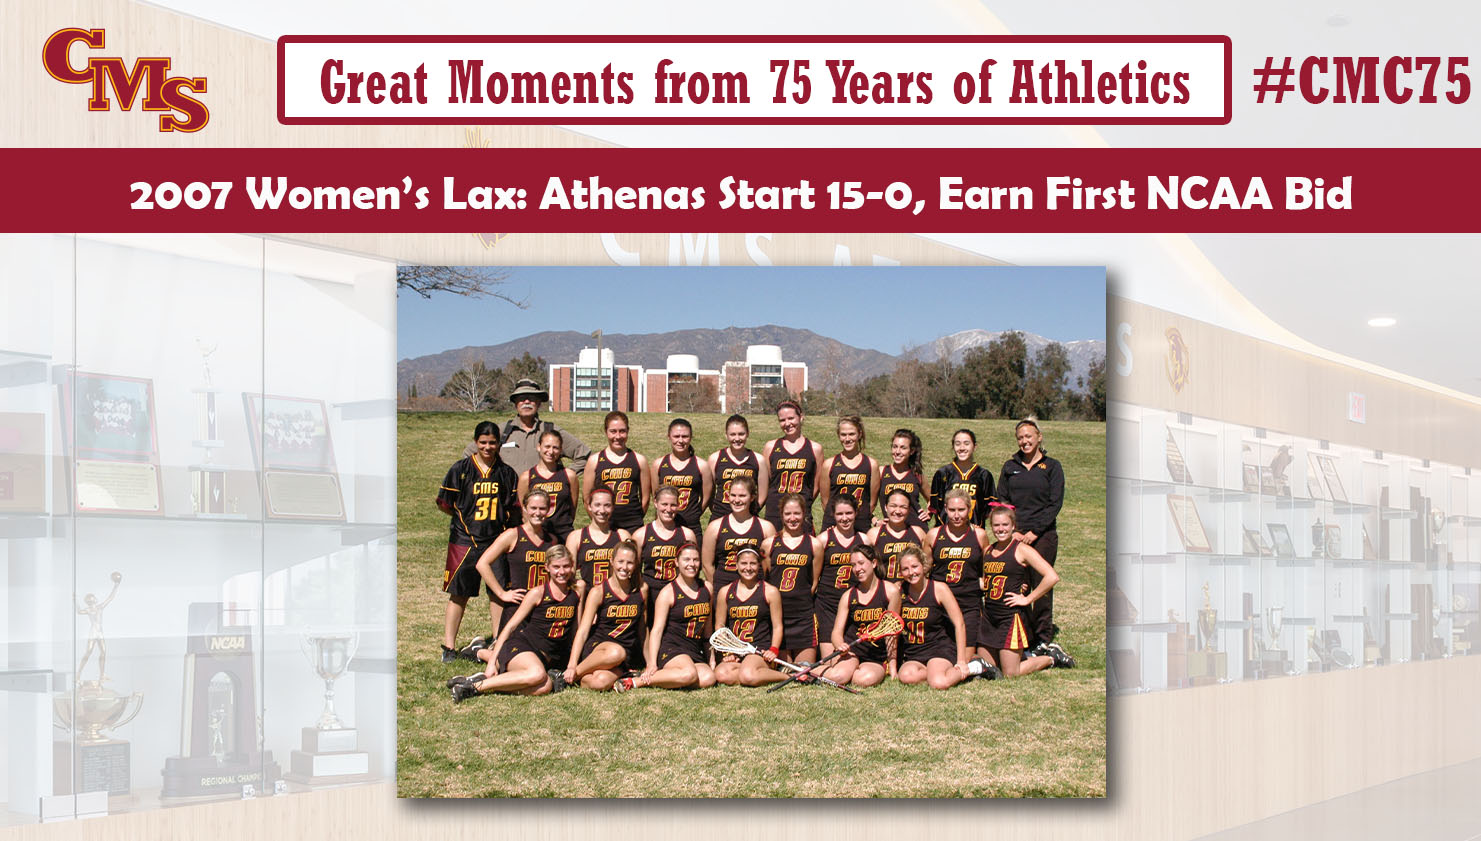 The 2007 WLAX team photo. Words over the photo read: Great Moments from 75 Years of Athletics. 2007 Women's Lax: Athenas Start 15-0, Earn First NCAA Bid